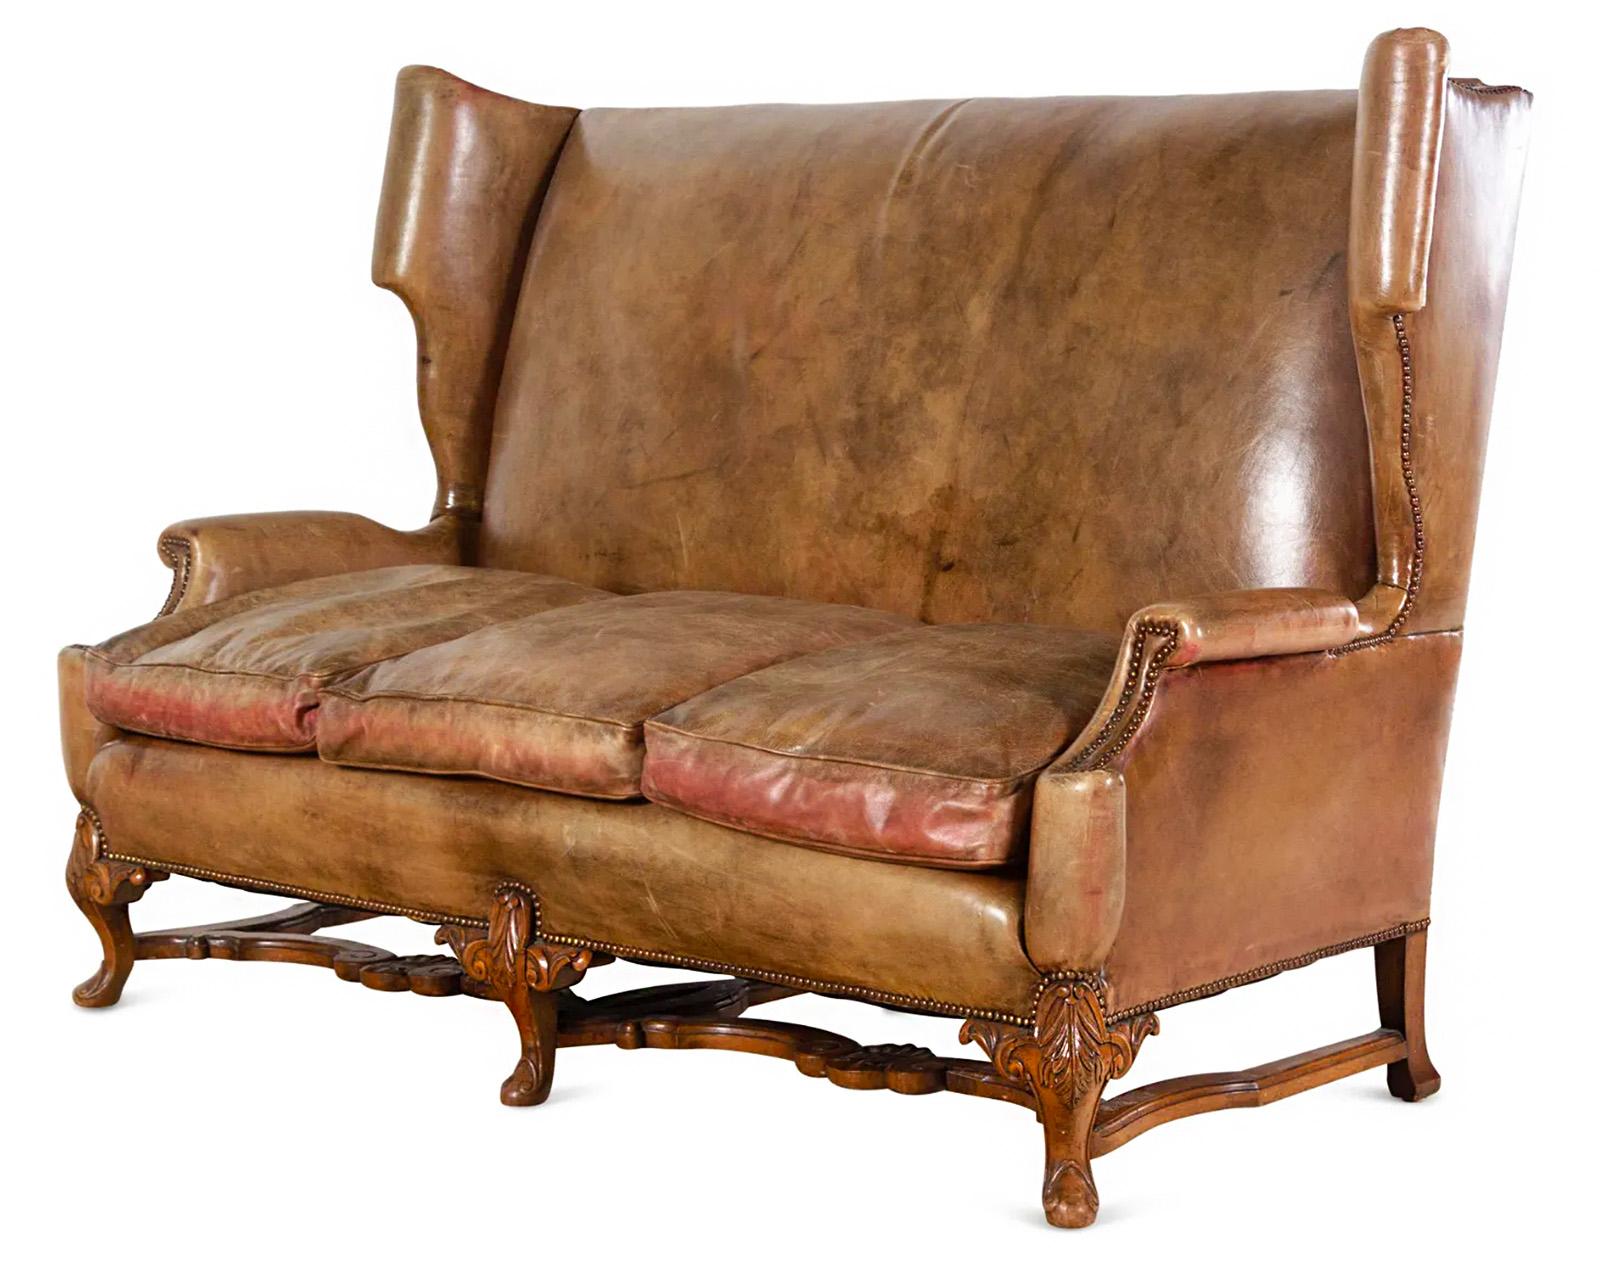 An early 20th century English leather wingback sofa.

Dimensions: 49.25